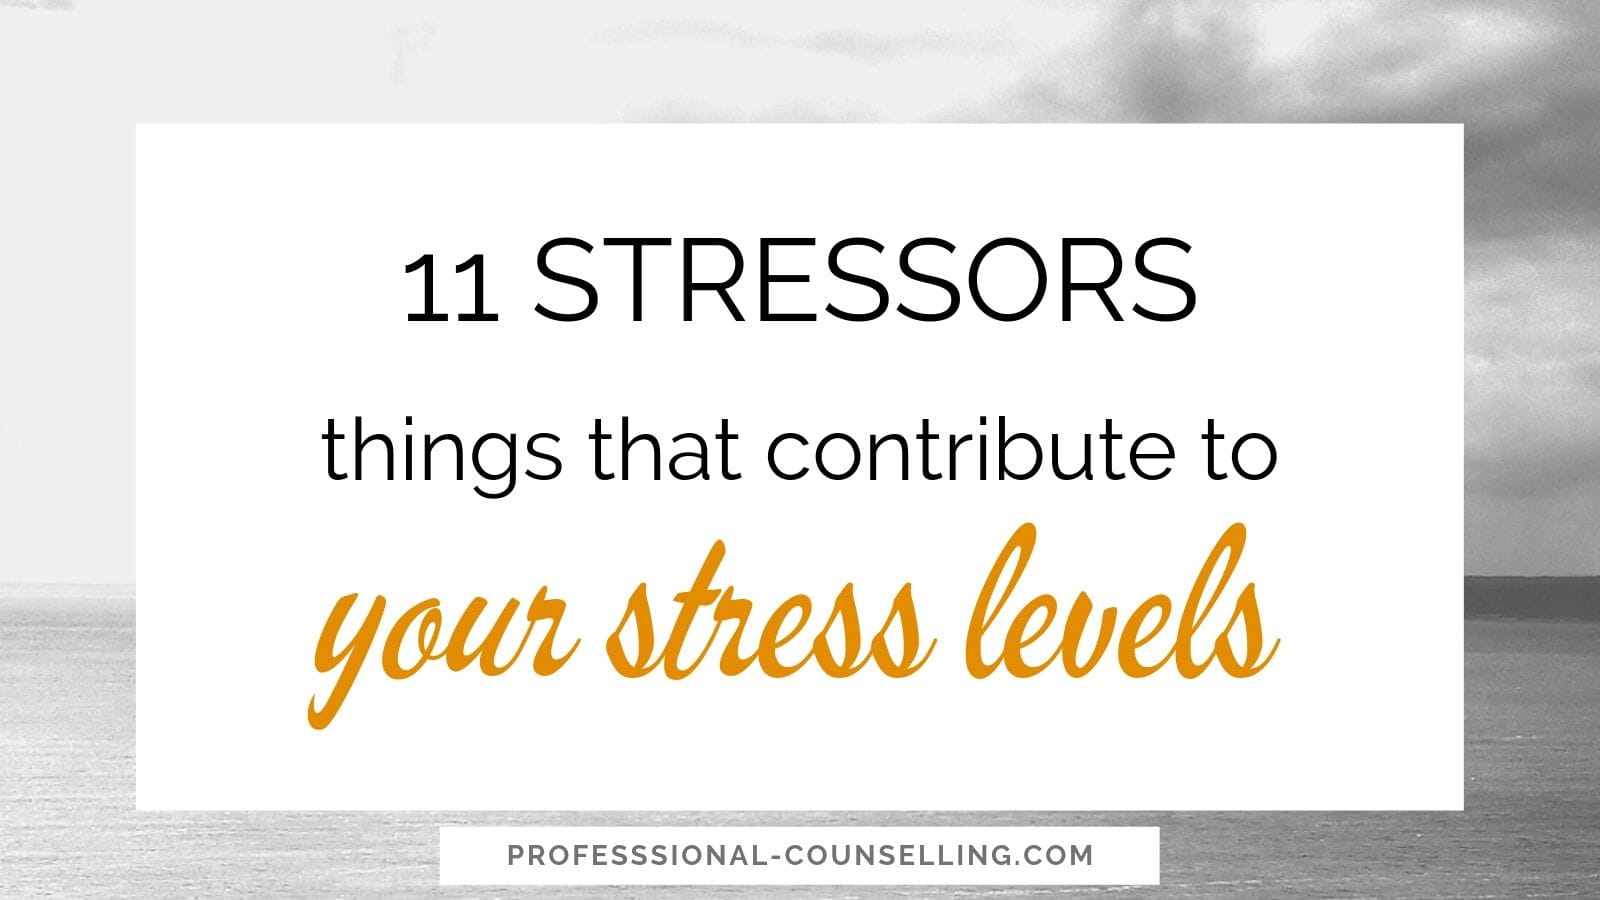 Why I stress for nothing: tips and advice